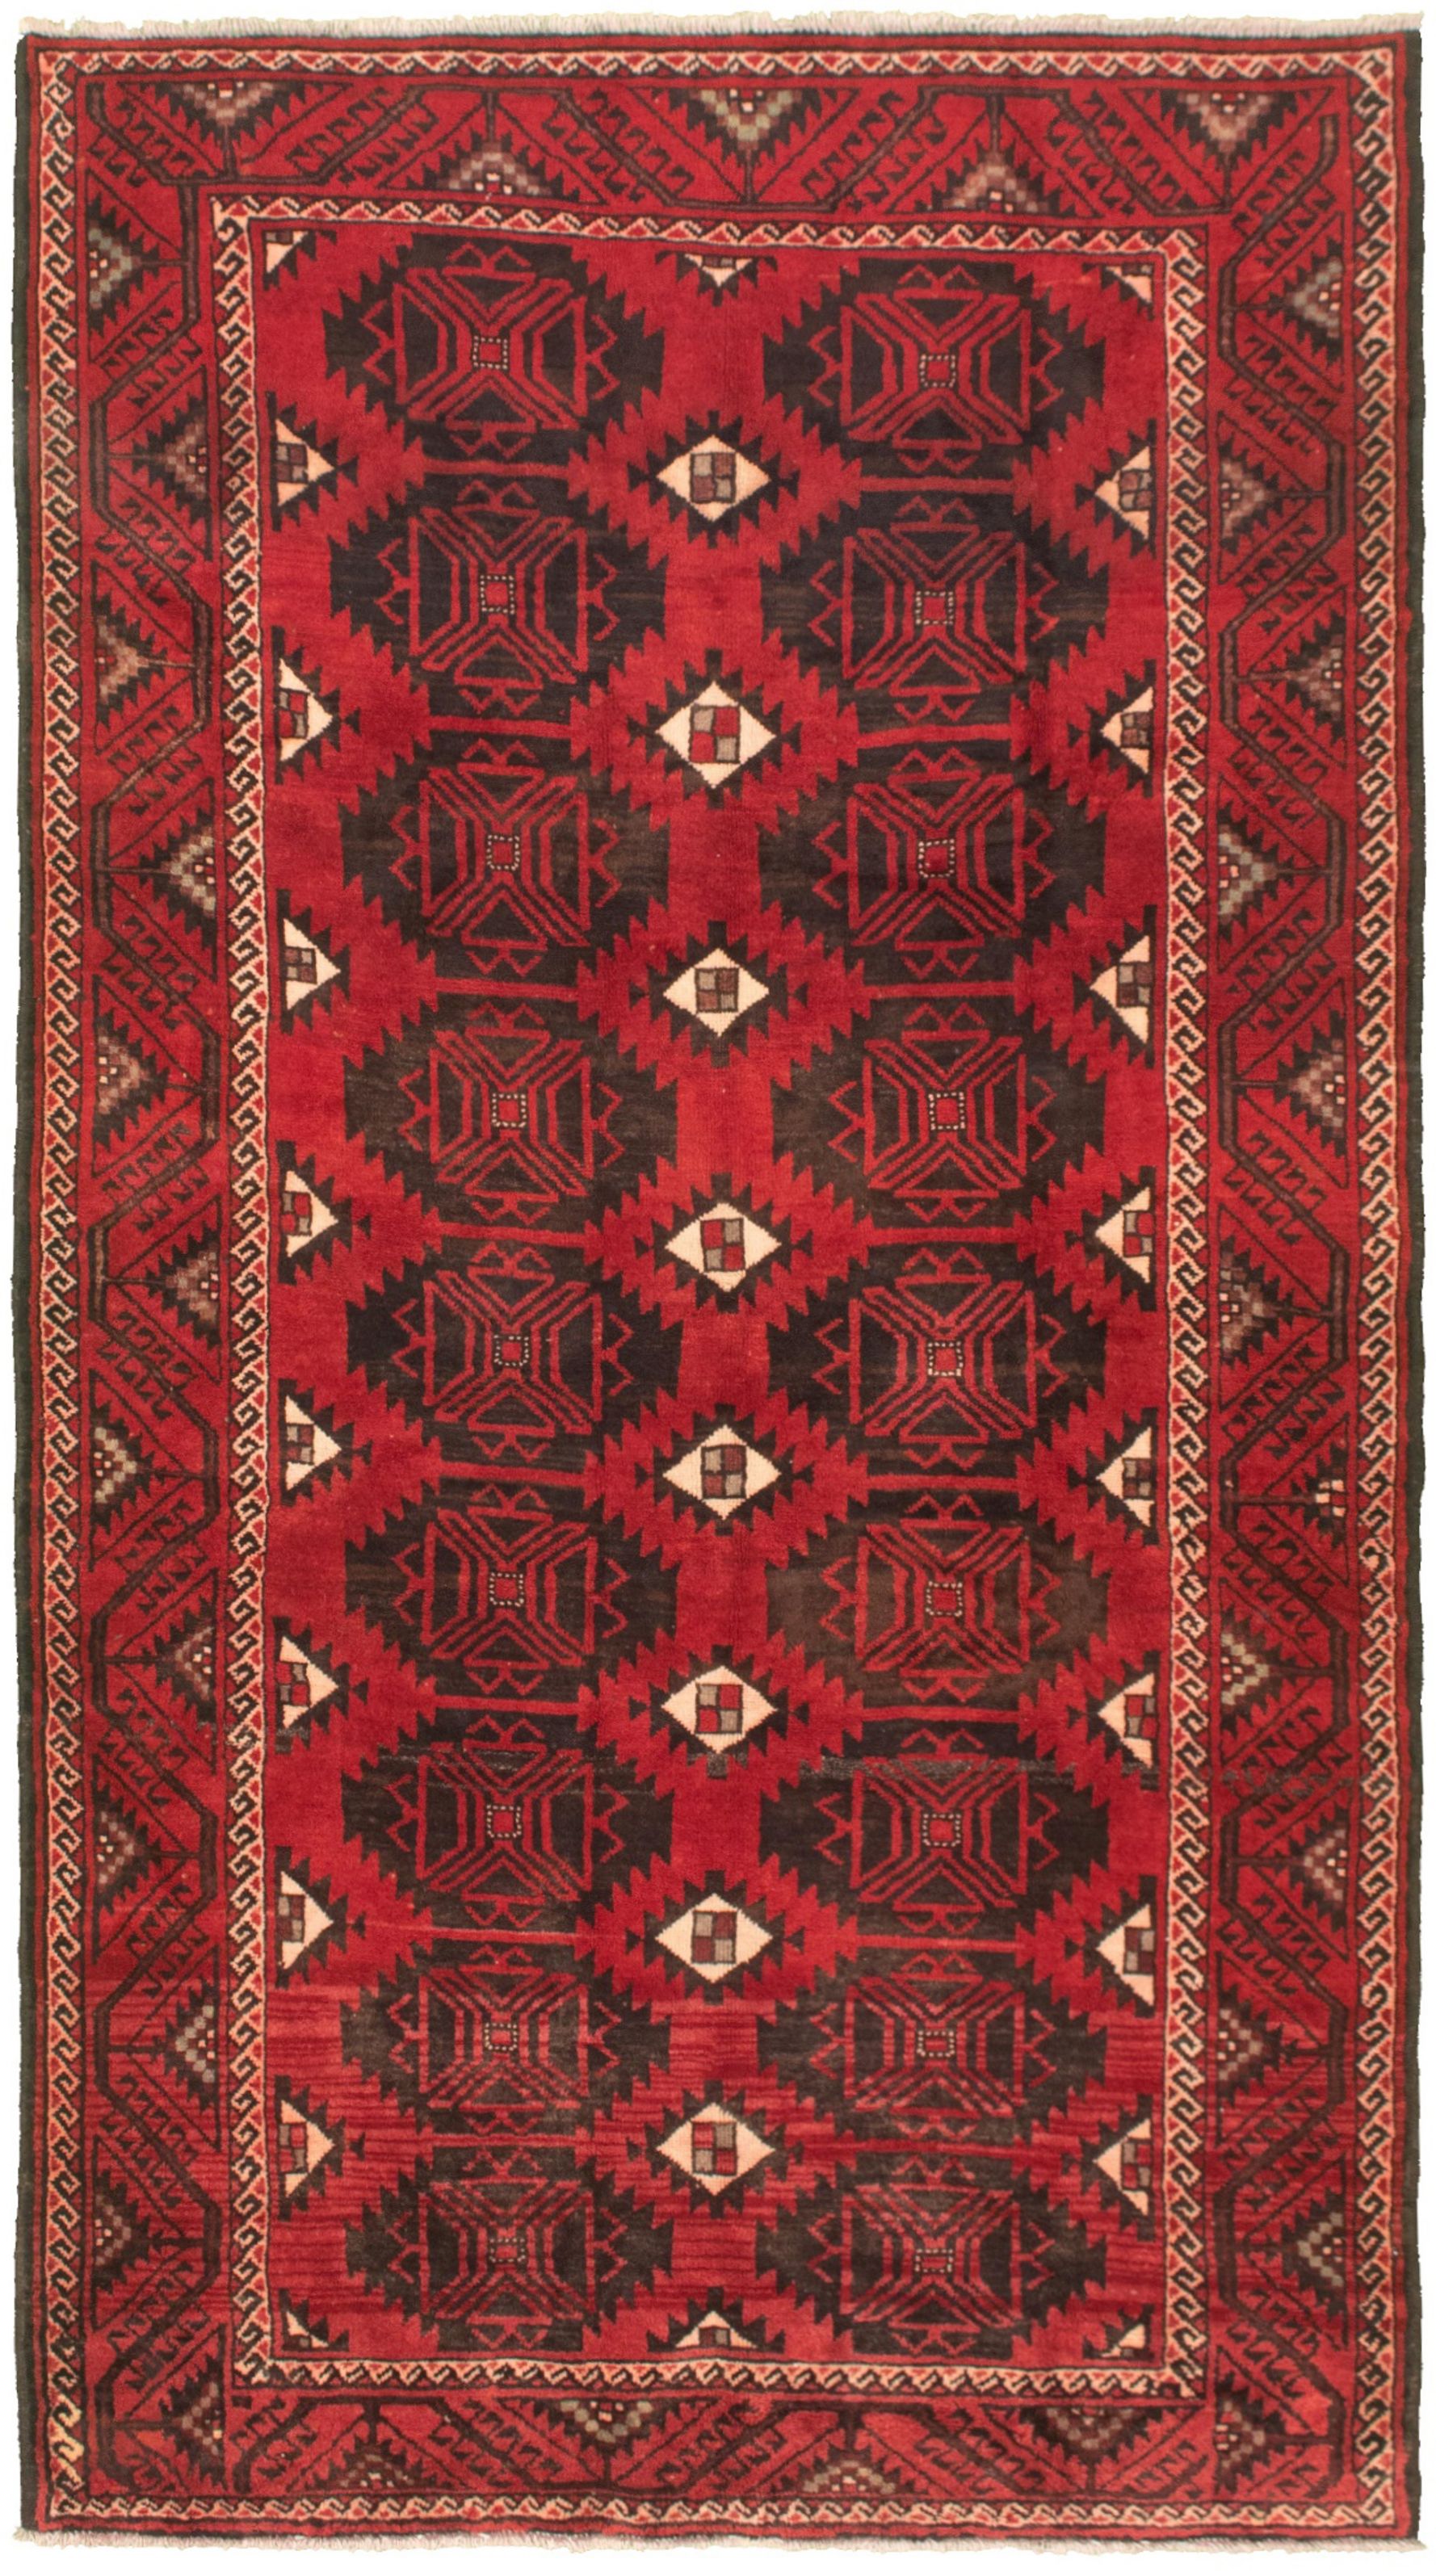 Hand-knotted Authentic Turkish Red Wool Rug 5'2" x 9'6"  Size: 5'2" x 9'6"  